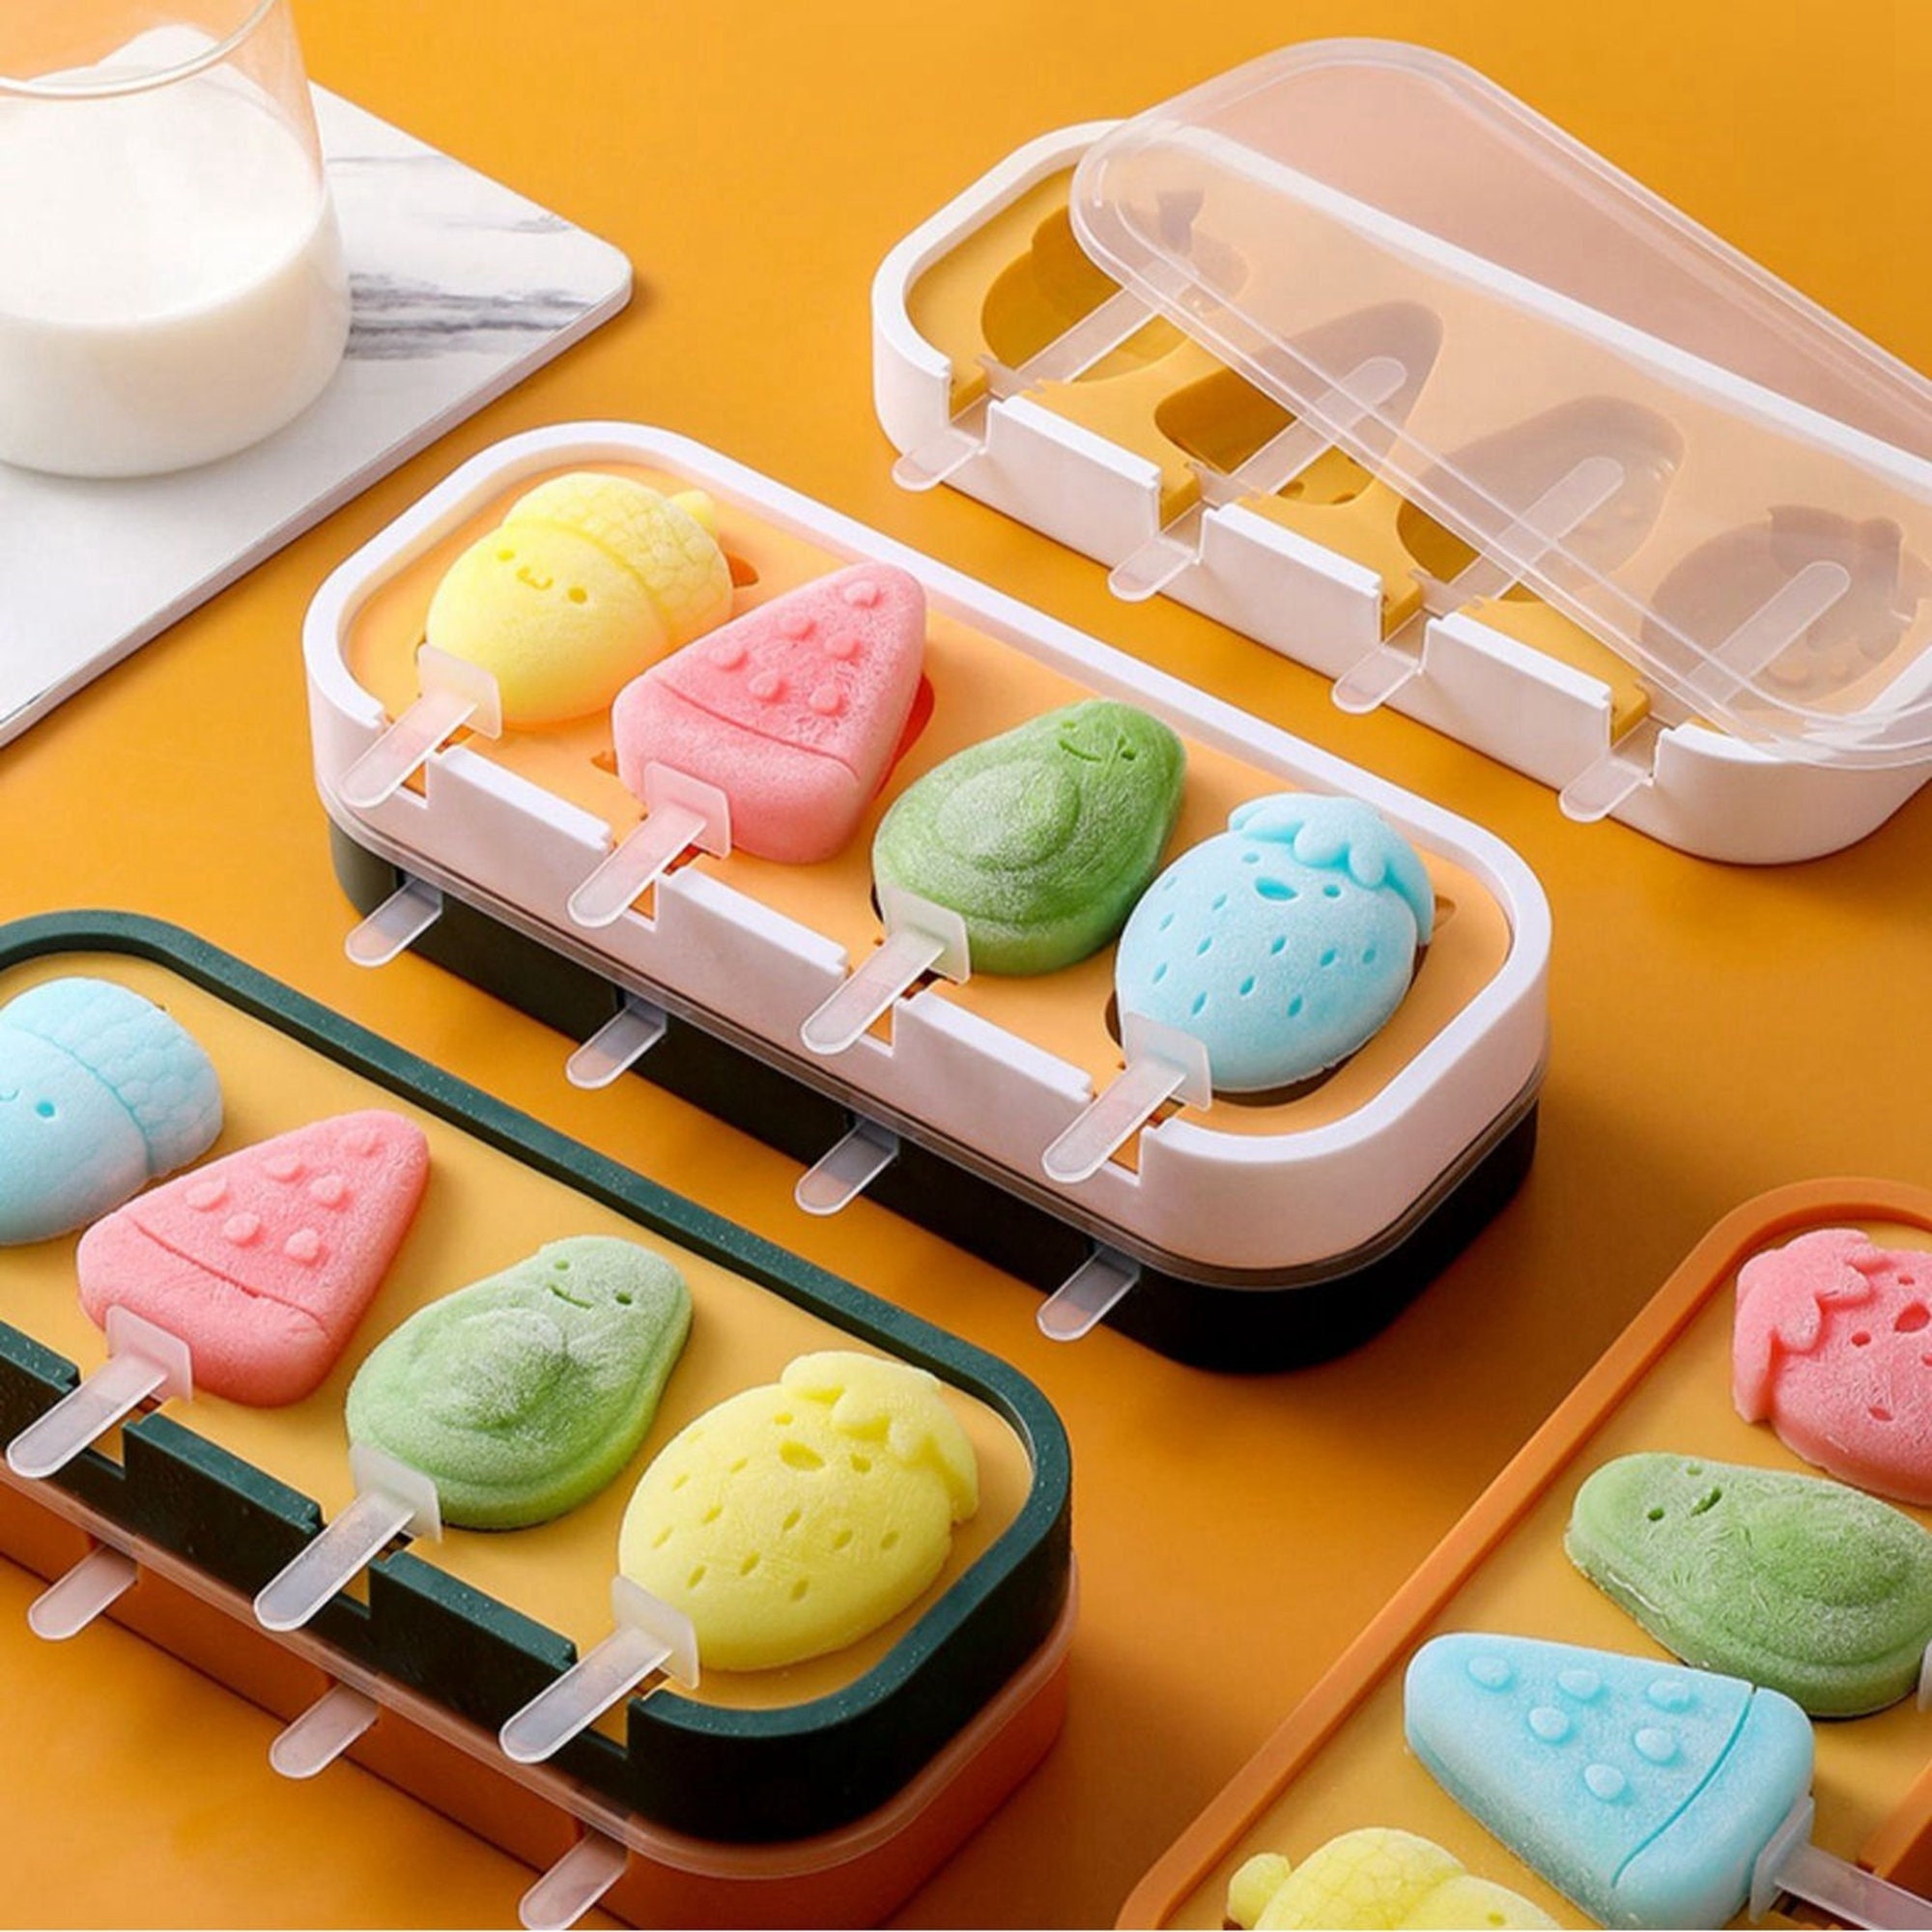 3 Cavity Popsicle Molds Food Safe Ice Pop Mold Fruit Makers Cute Cartoon  Shapes